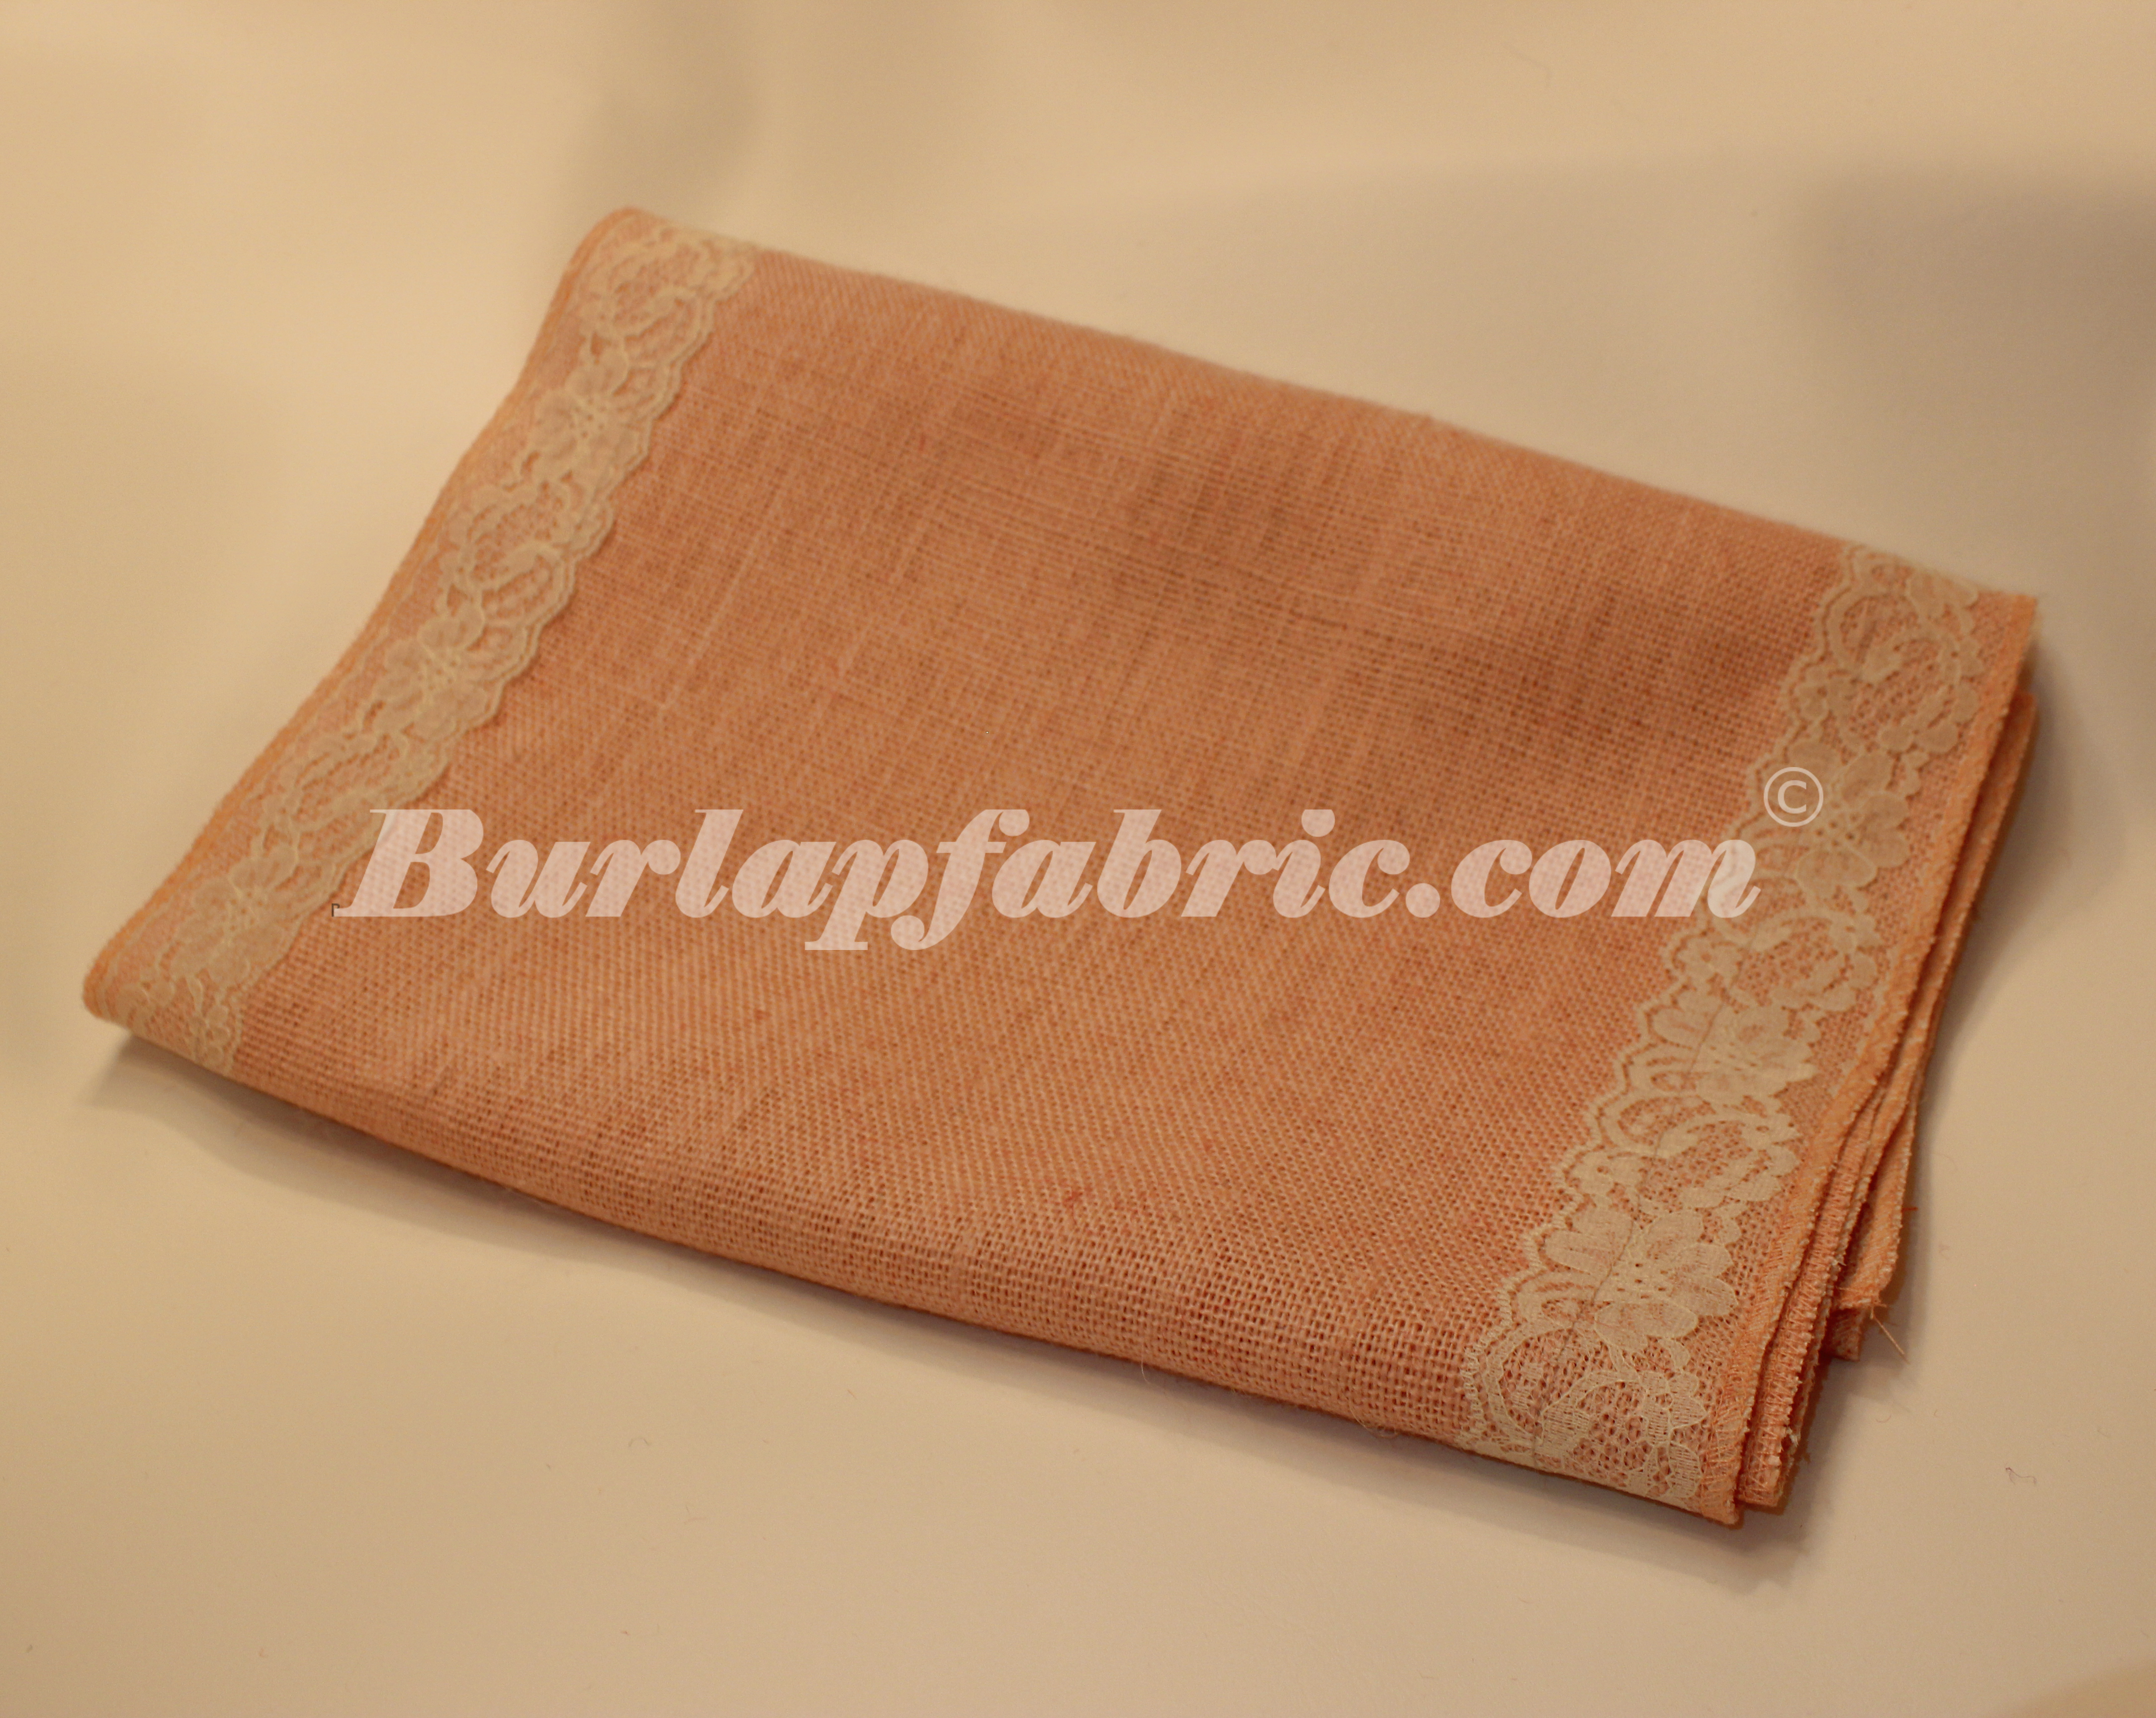 14" Peach Burlap Runner with 2" Ivory Lace Borders